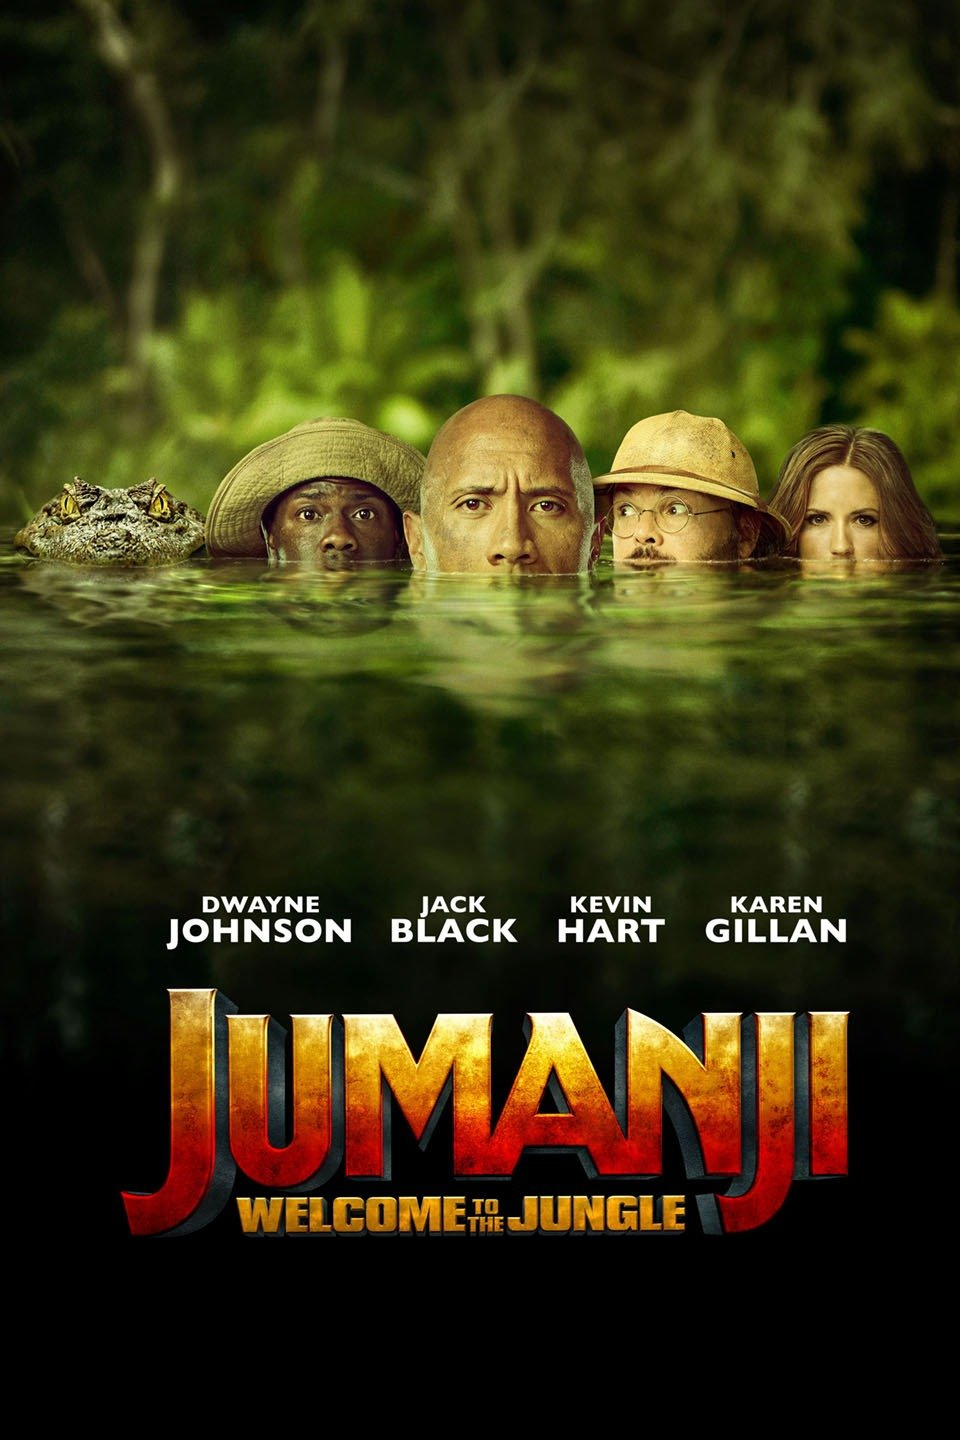 Jumanji-Welcome-to-the-Jungle-Tamil-Dubbed-TamilRockers